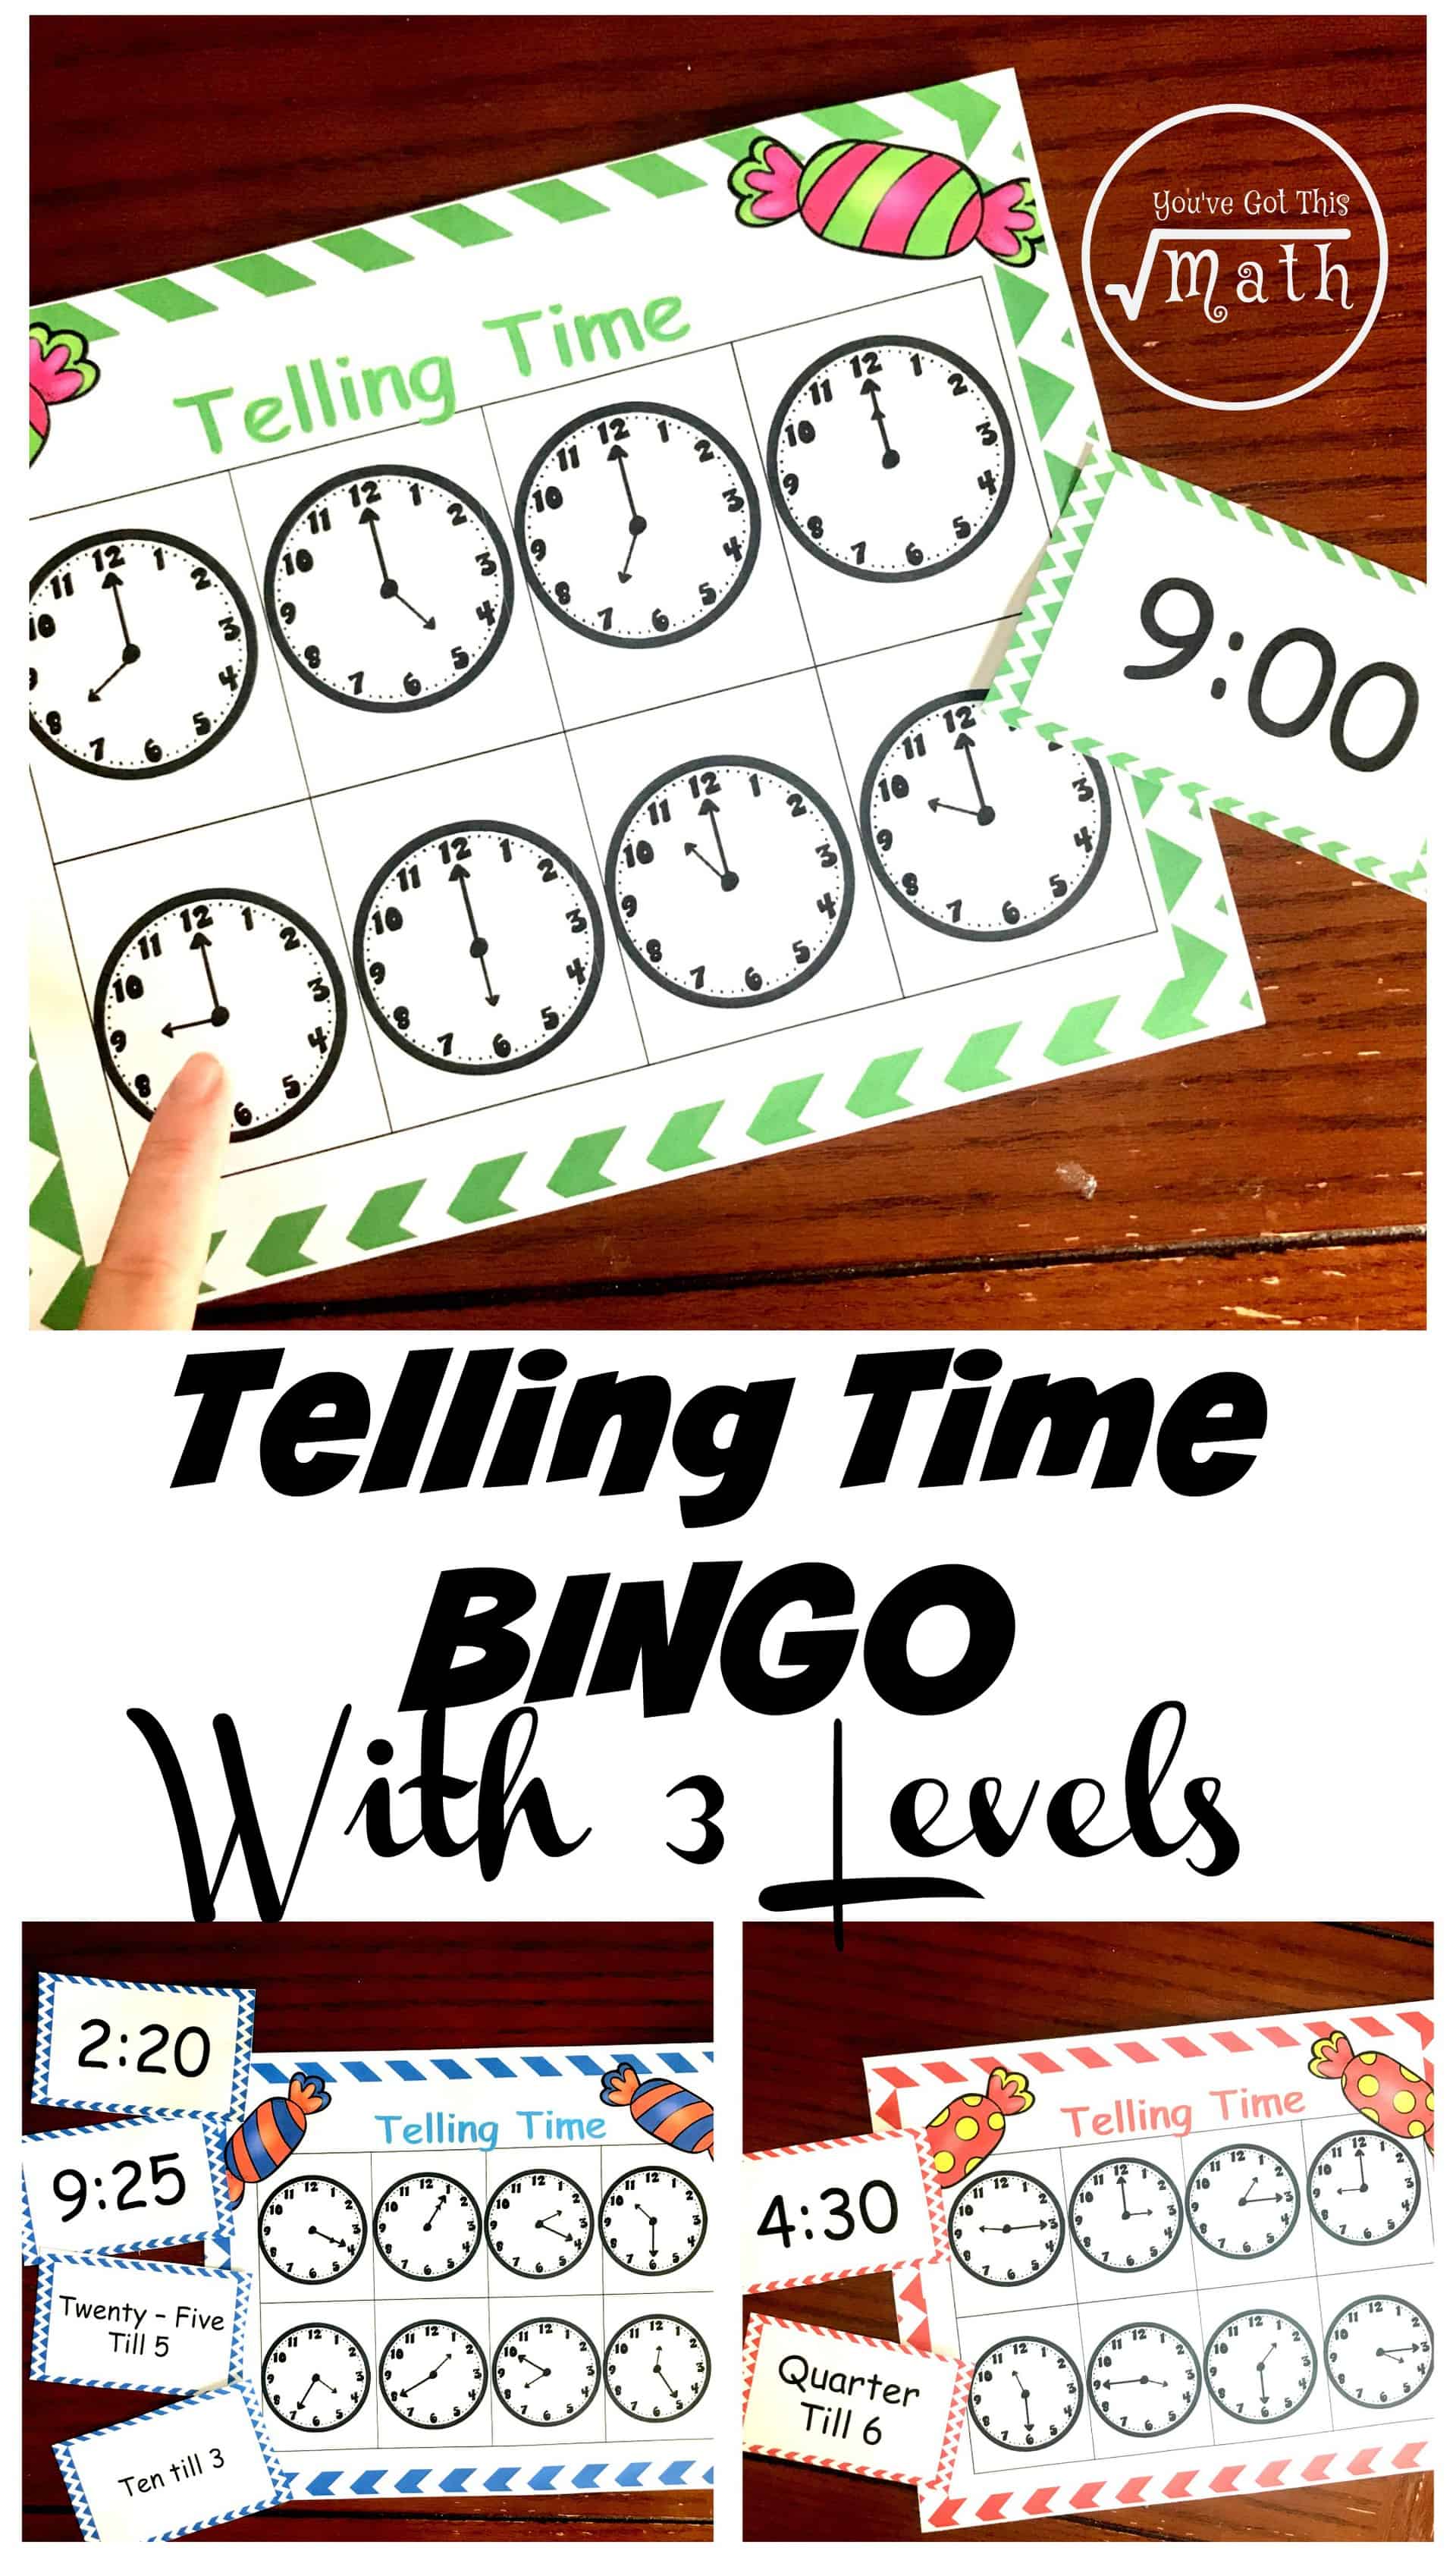 This bingo game is a great telling time for kids activity. With three different levels your kids will work on telling to the hour, then quarter and half hour, and finally to five-minute increments. It also includes word cards like half past and quarter till.